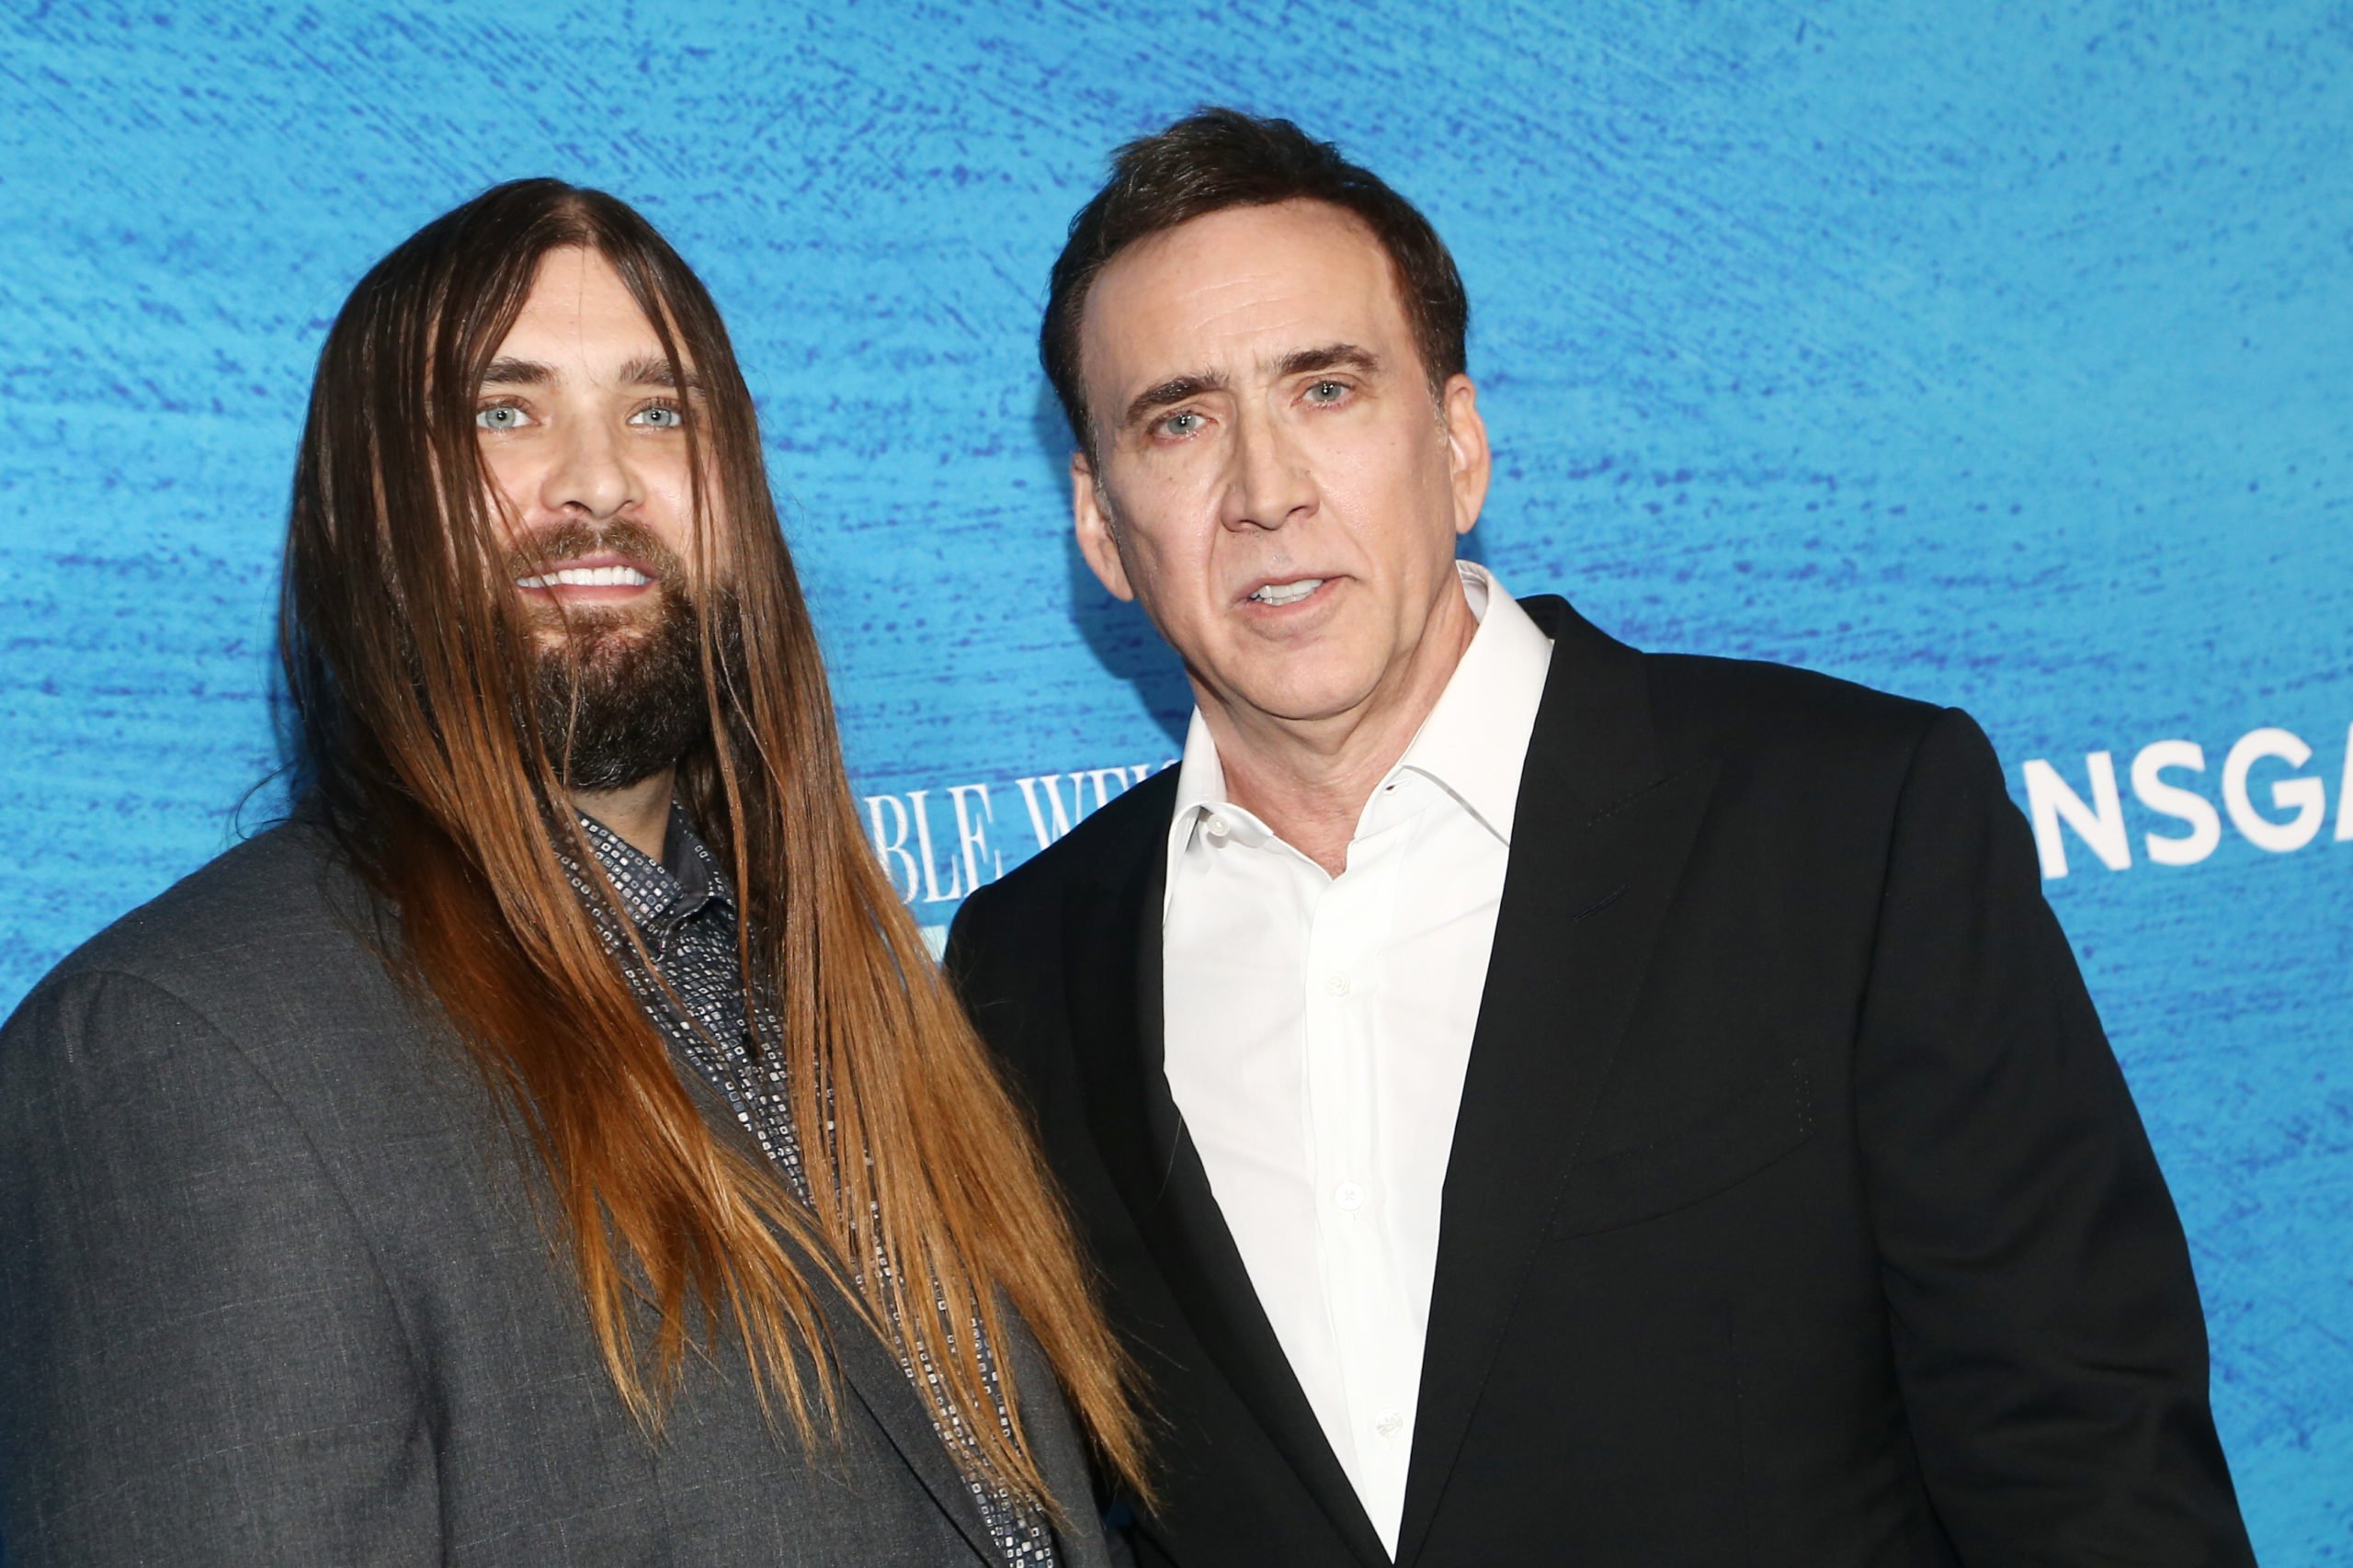 LOS ANGELES, CALIFORNIA - APRIL 18: (L-R) Weston Cage Coppola and Nicolas Cage attend the Los Angeles Special Screening Of "The Unbearable Weight Of Massive Talent" at DGA Theater Complex on April 18, 2022 in Los Angeles, California. (Photo by Tommaso Boddi/FilmMagic) Getty Images